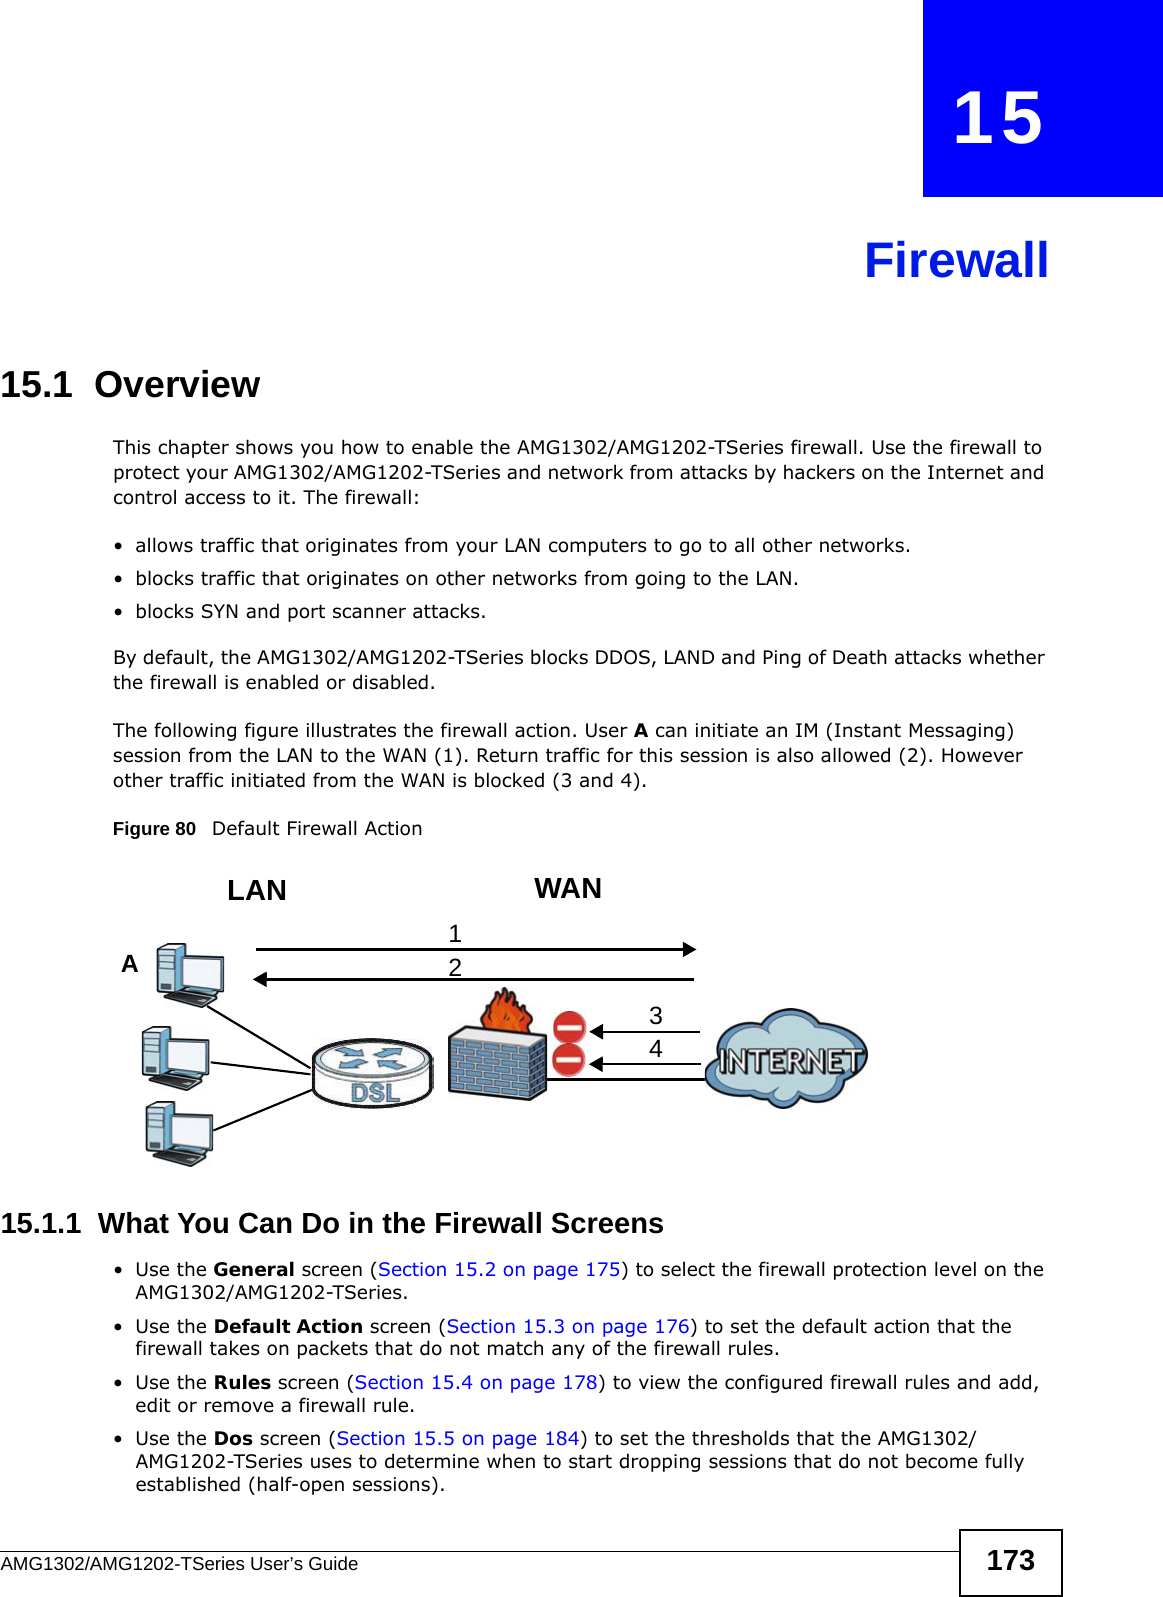 AMG1302/AMG1202-TSeries User’s Guide 173CHAPTER   15Firewall15.1  OverviewThis chapter shows you how to enable the AMG1302/AMG1202-TSeries firewall. Use the firewall to protect your AMG1302/AMG1202-TSeries and network from attacks by hackers on the Internet and control access to it. The firewall:• allows traffic that originates from your LAN computers to go to all other networks. • blocks traffic that originates on other networks from going to the LAN.• blocks SYN and port scanner attacks.By default, the AMG1302/AMG1202-TSeries blocks DDOS, LAND and Ping of Death attacks whether the firewall is enabled or disabled.The following figure illustrates the firewall action. User A can initiate an IM (Instant Messaging) session from the LAN to the WAN (1). Return traffic for this session is also allowed (2). However other traffic initiated from the WAN is blocked (3 and 4).Figure 80   Default Firewall Action15.1.1  What You Can Do in the Firewall Screens•Use the General screen (Section 15.2 on page 175) to select the firewall protection level on the AMG1302/AMG1202-TSeries.•Use the Default Action screen (Section 15.3 on page 176) to set the default action that the firewall takes on packets that do not match any of the firewall rules.•Use the Rules screen (Section 15.4 on page 178) to view the configured firewall rules and add, edit or remove a firewall rule.•Use the Dos screen (Section 15.5 on page 184) to set the thresholds that the AMG1302/AMG1202-TSeries uses to determine when to start dropping sessions that do not become fully established (half-open sessions).WANLAN3412A